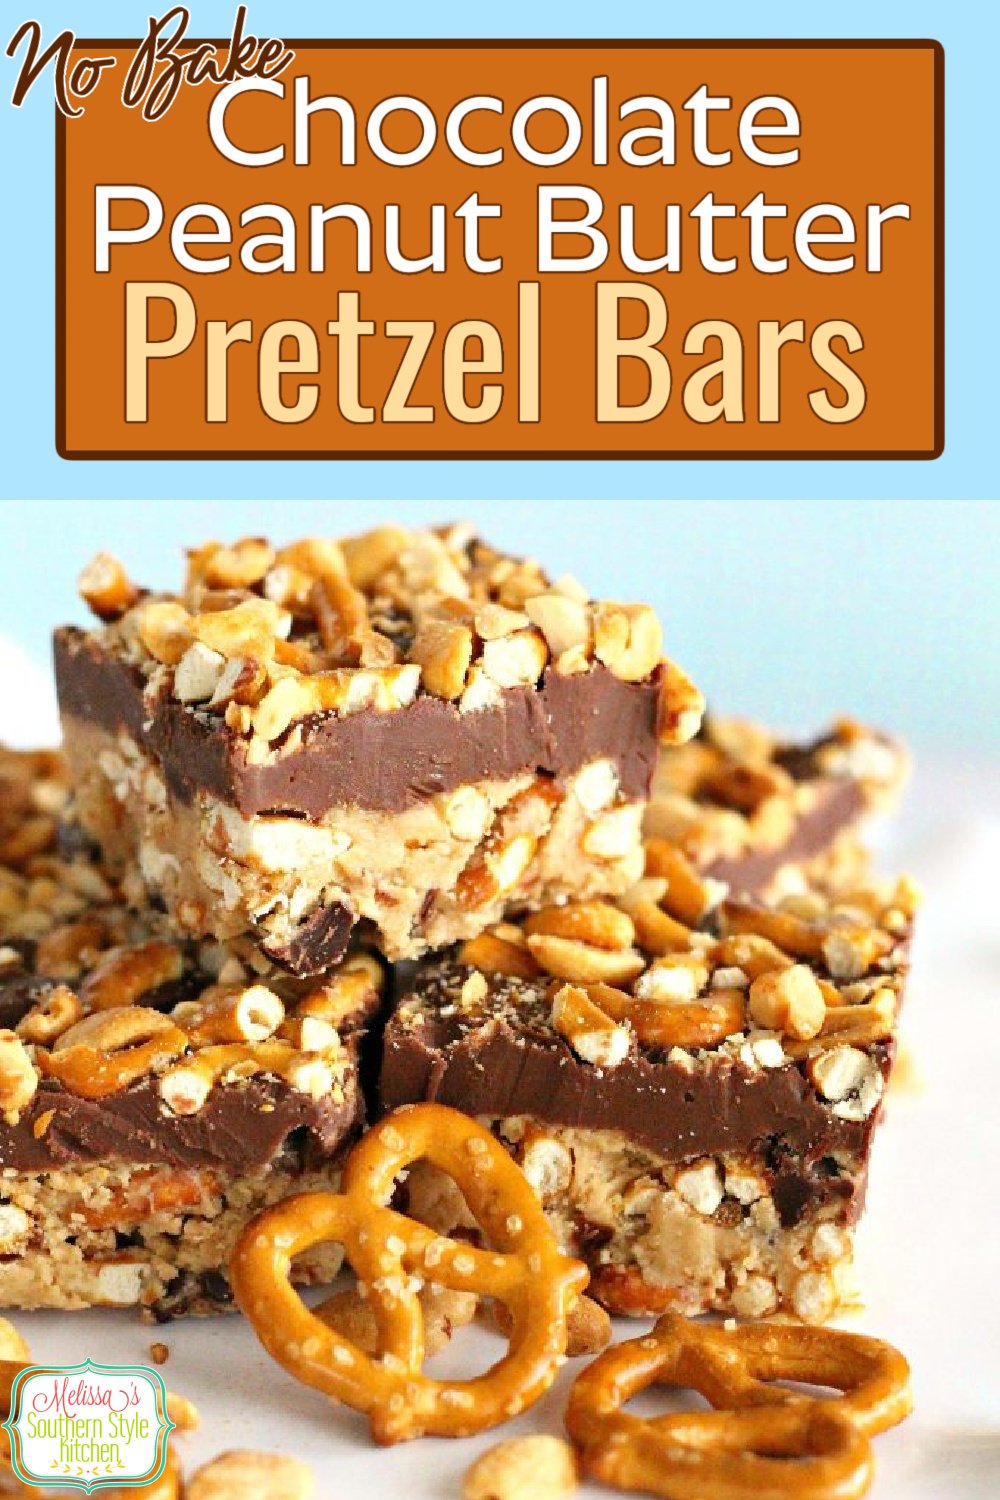 You'll love these no bake sweet and salty Chocolate Peanut Butter Pretzel Bars #chocolatebars #peanutbutterbars #pretzels #desserts #dessertfoodrecipes #southernfood #southernrecipes #pretzelbars via @melissasssk